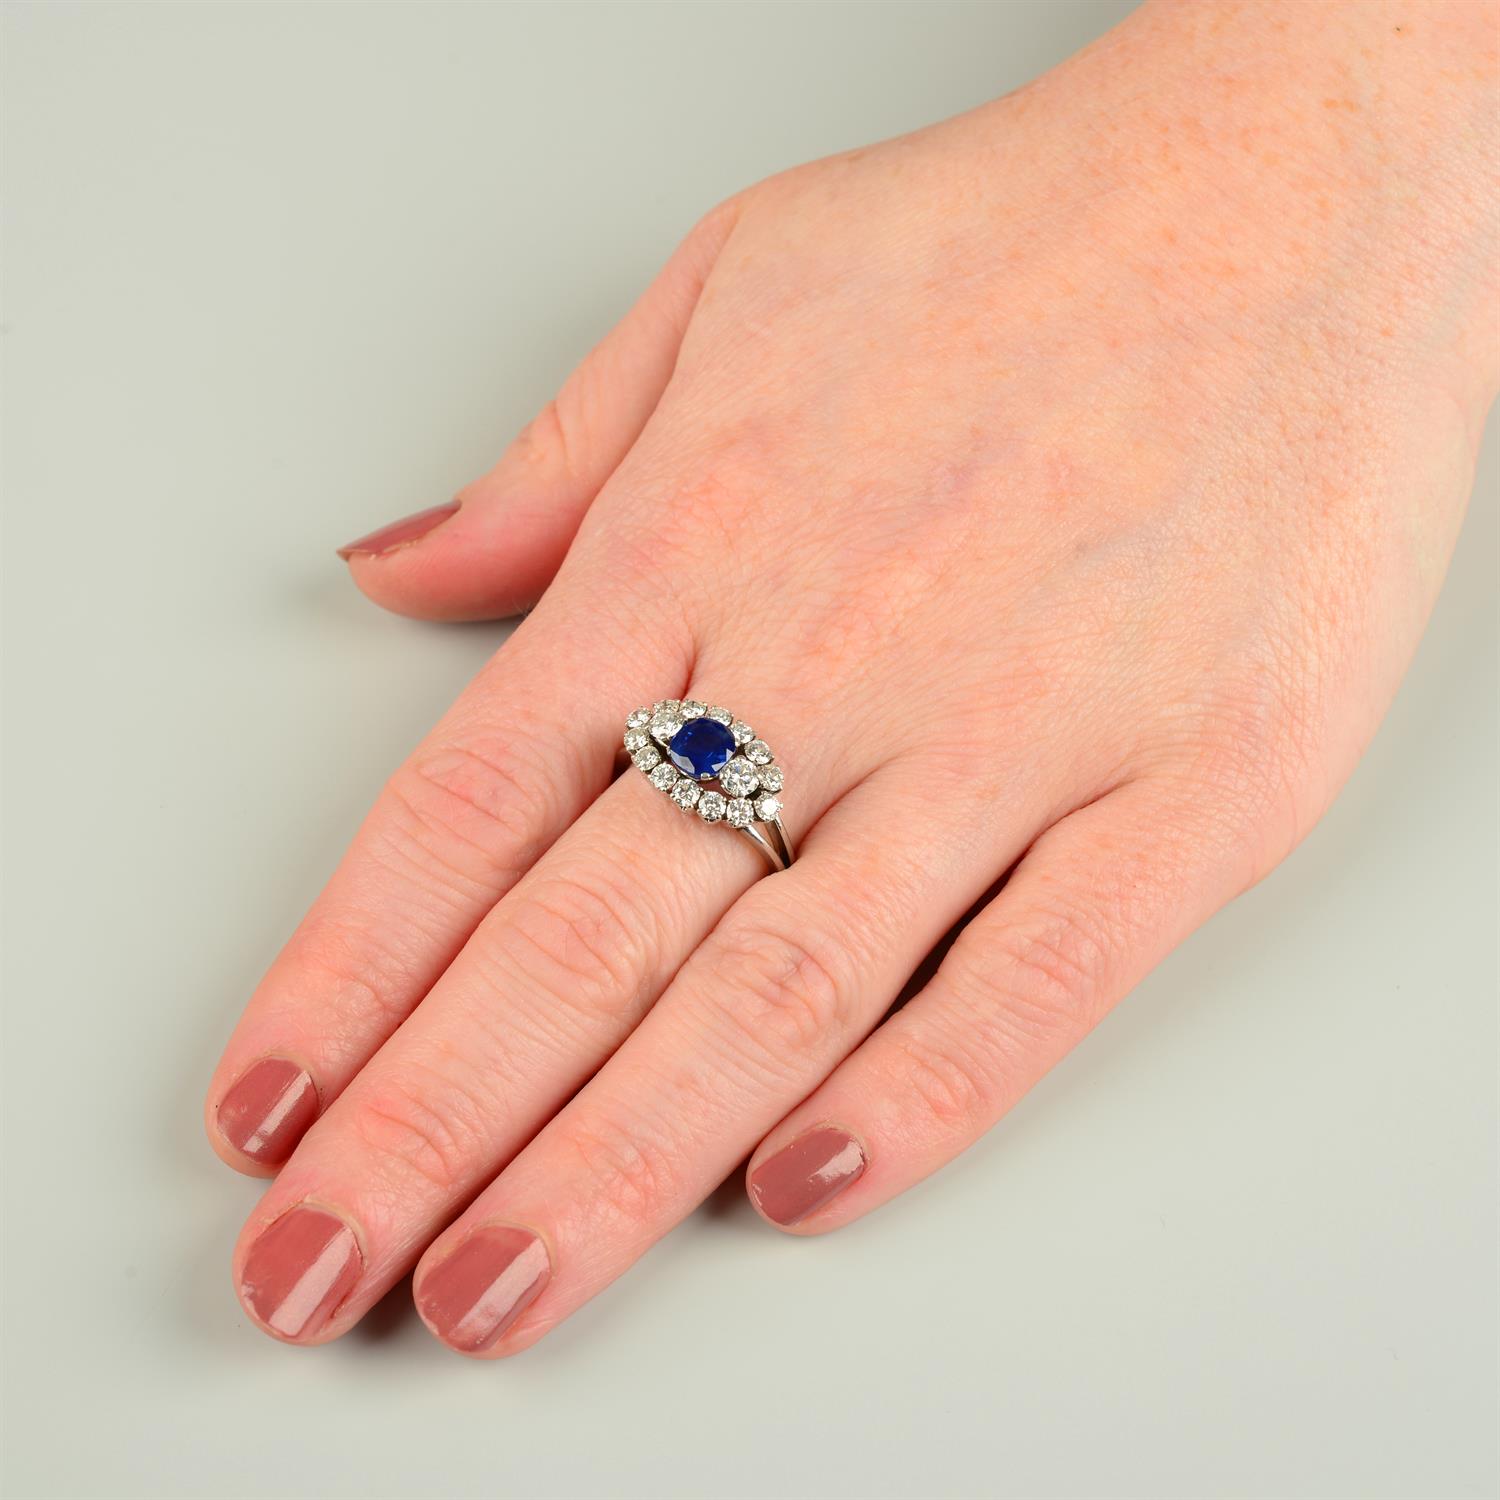 A Basaltic sapphire and brilliant-cut diamond dress ring. - Image 5 of 5